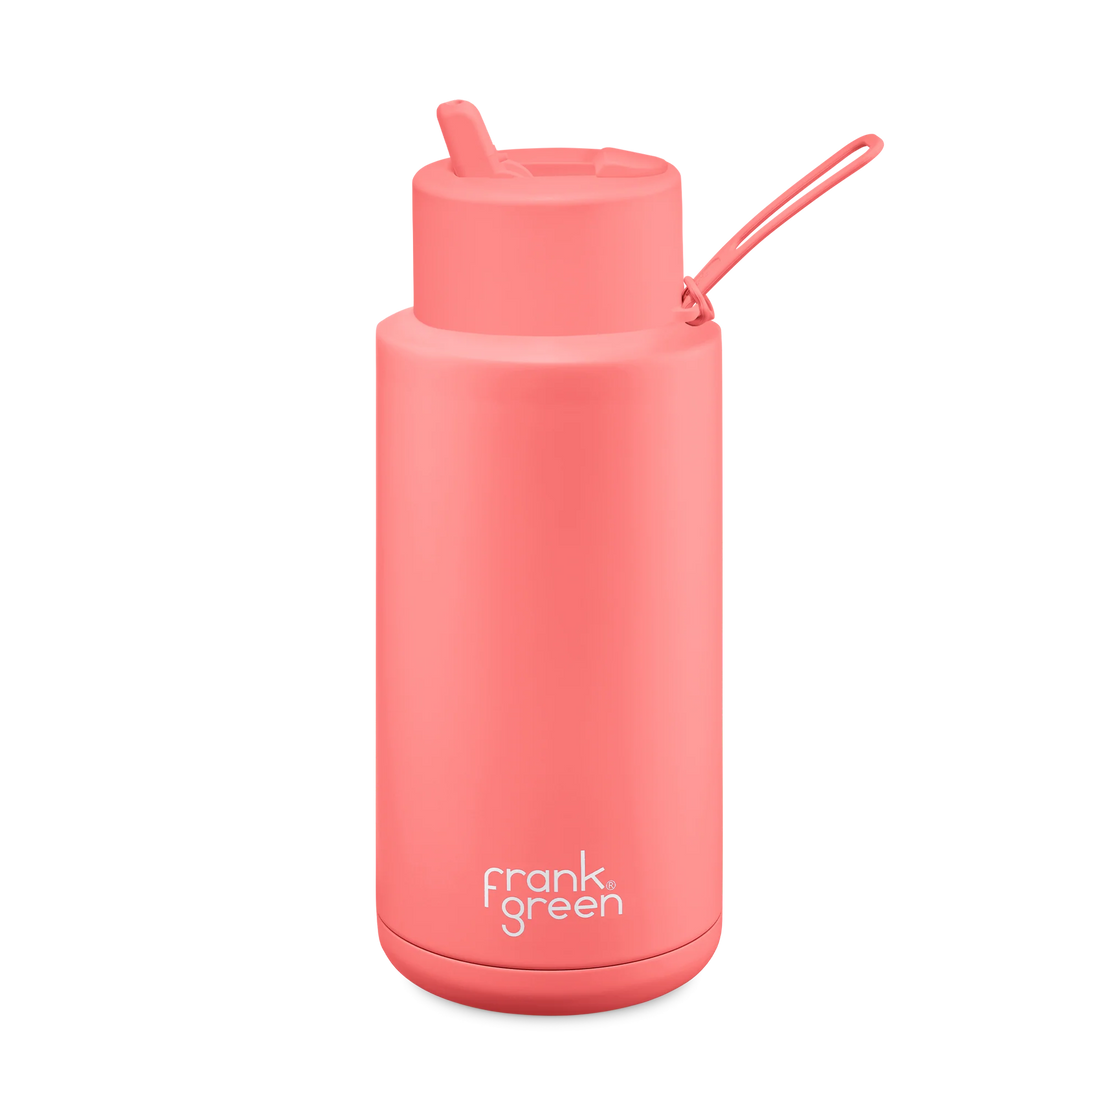 Frank Green Stainless Steel Ceramic Reusable Bottle Sweat Peach With Straw And Strap 34oz/1,000ml